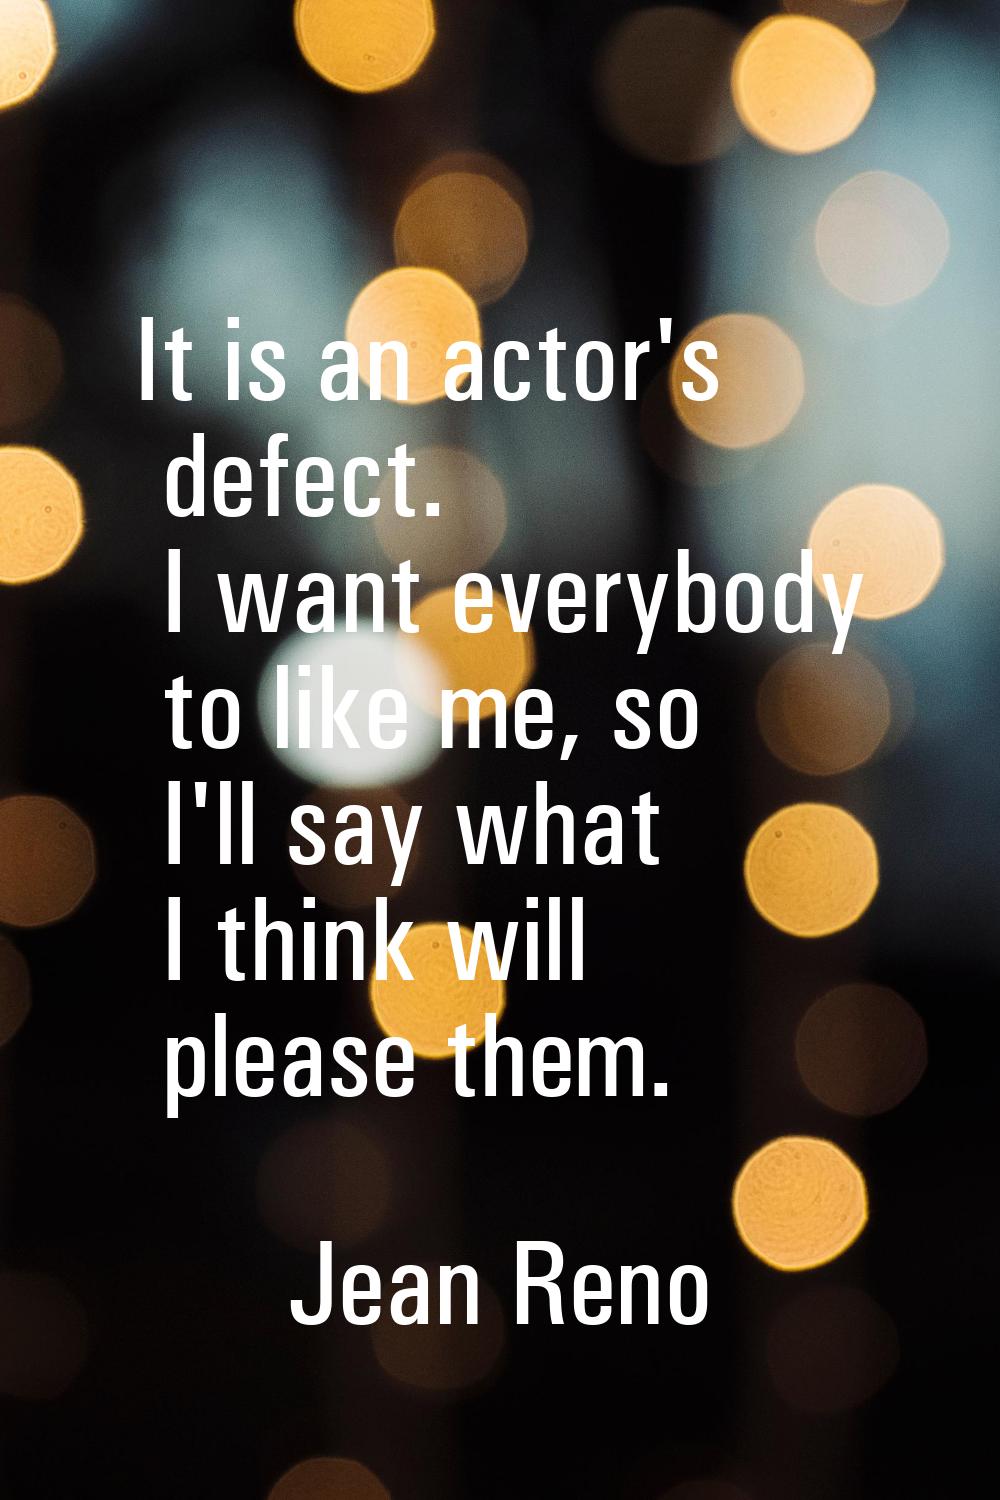 It is an actor's defect. I want everybody to like me, so I'll say what I think will please them.